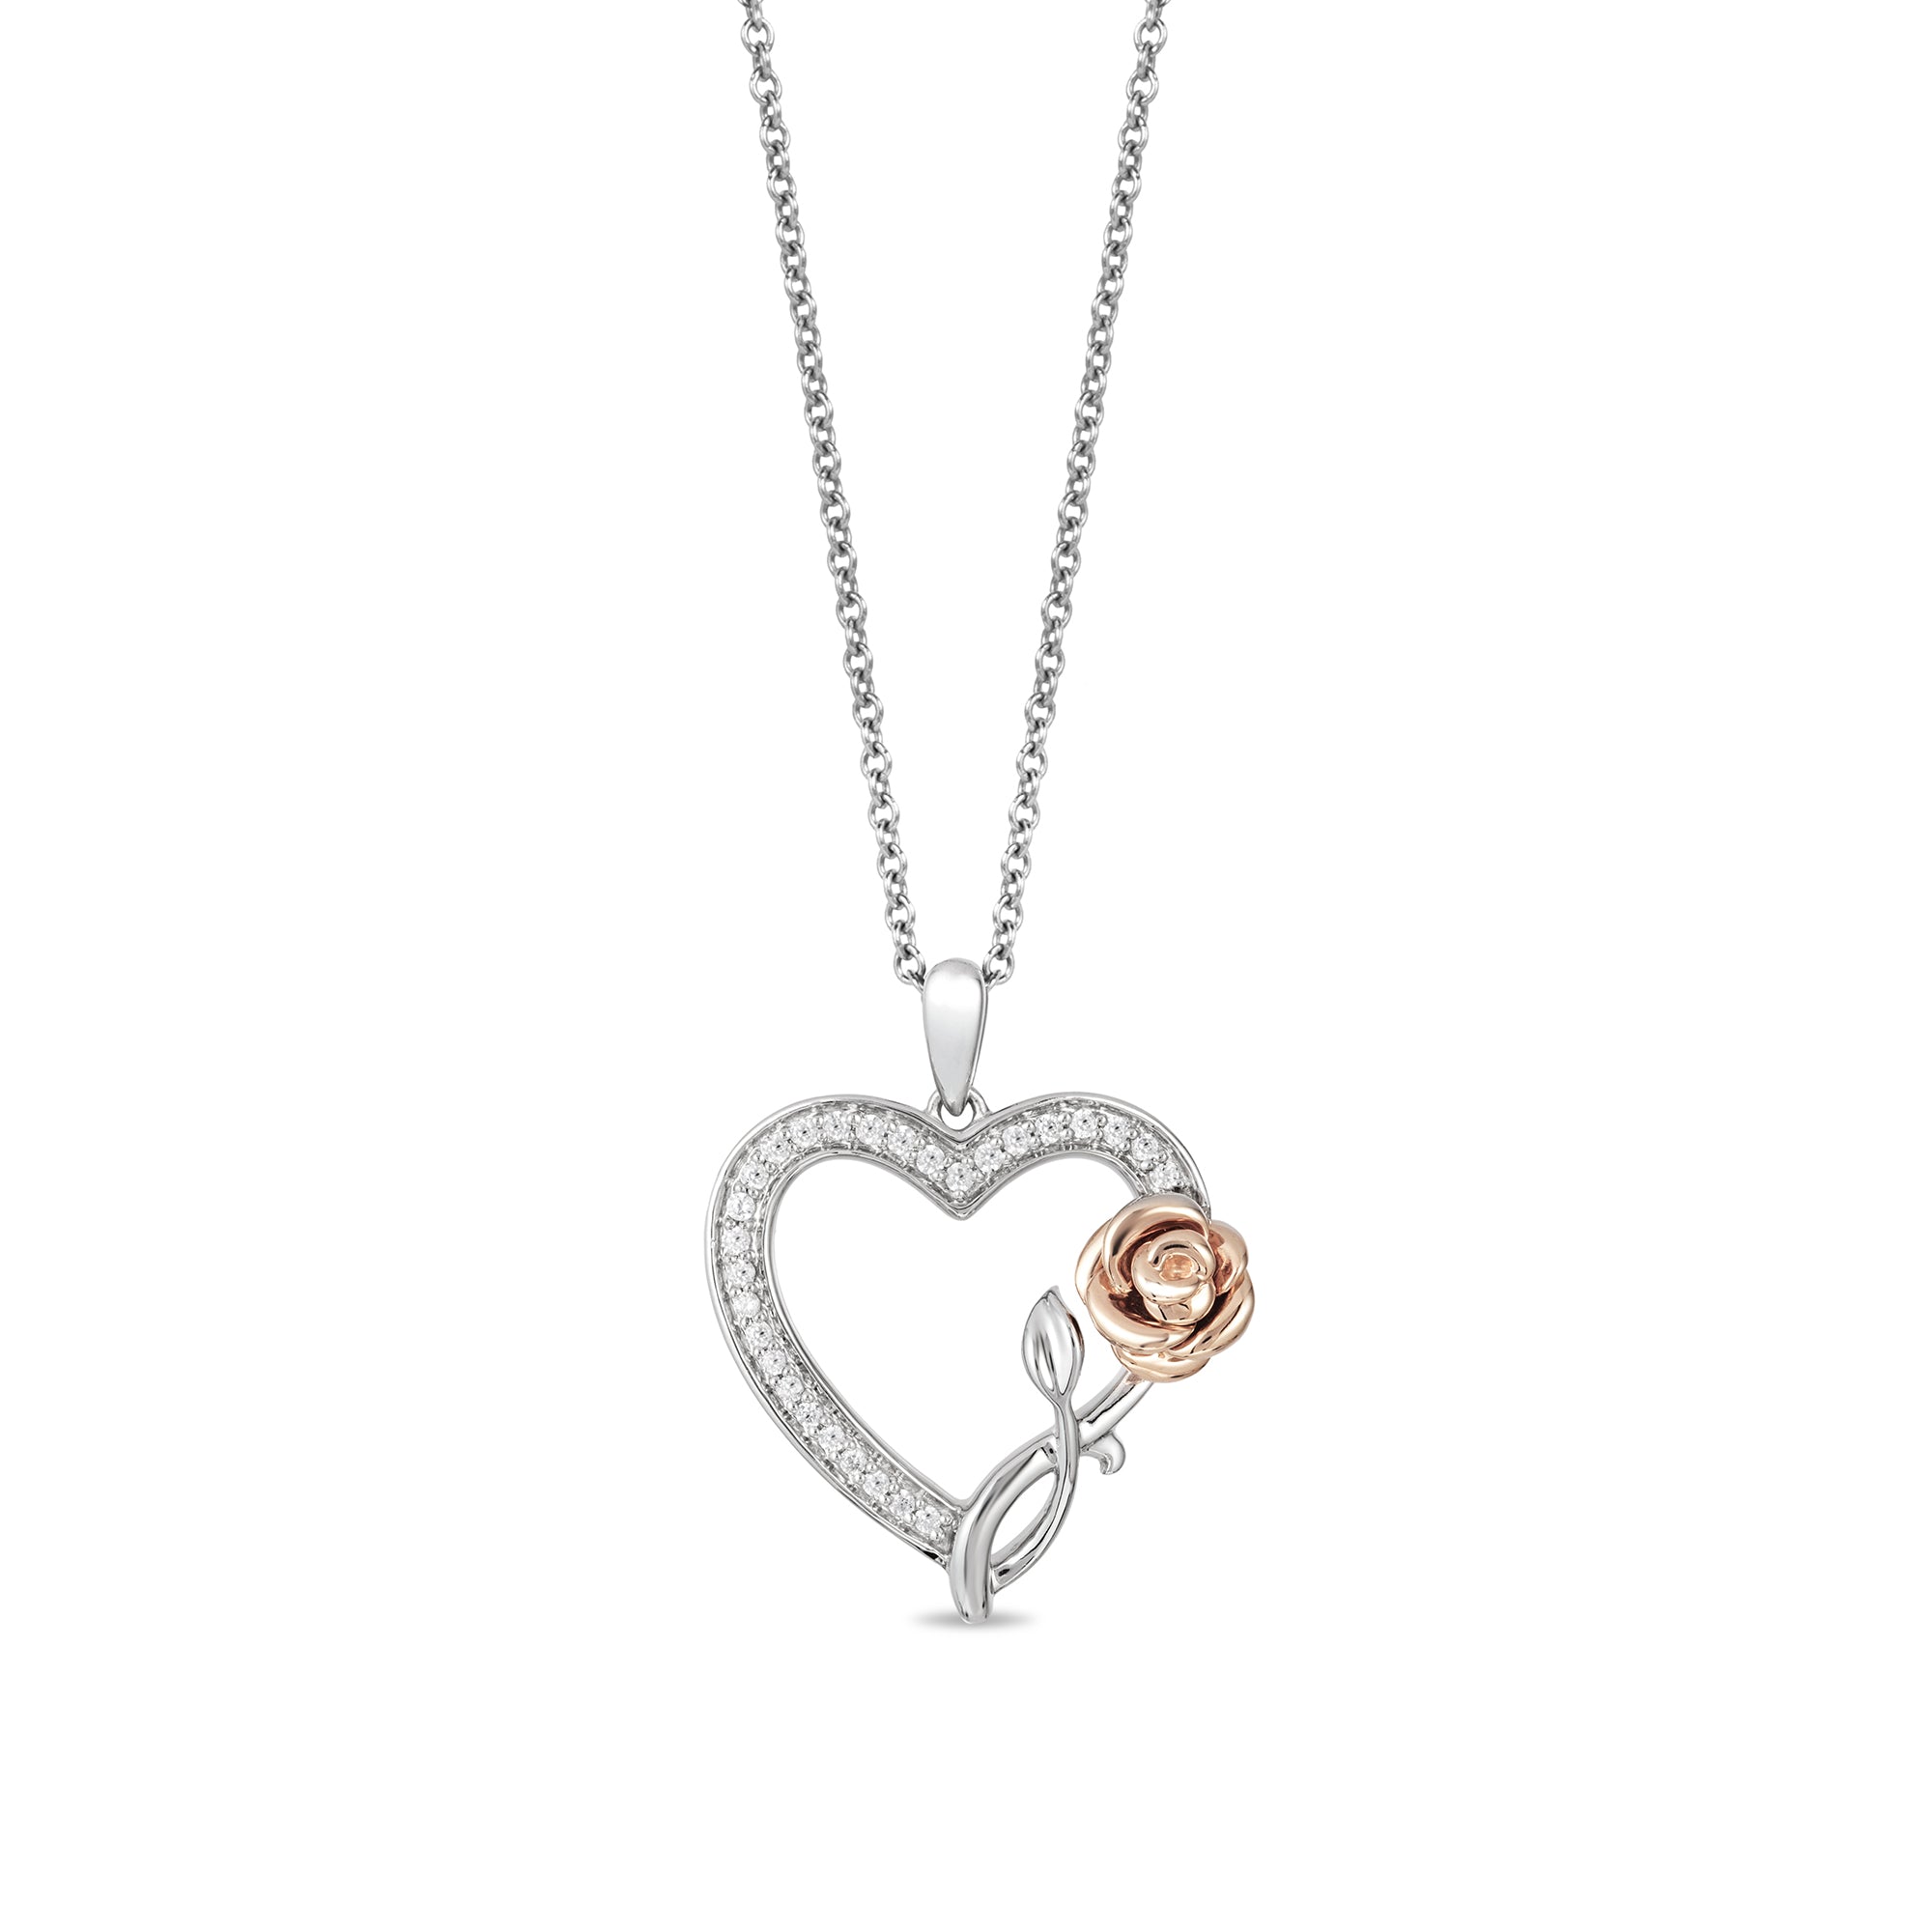 Disney Belle Inspired Diamond Rose with Heart Pendant Necklace in 10K Sterling Silver & Rose Gold 1/6 Cttw | Enchanted Disney Fine Jewelry